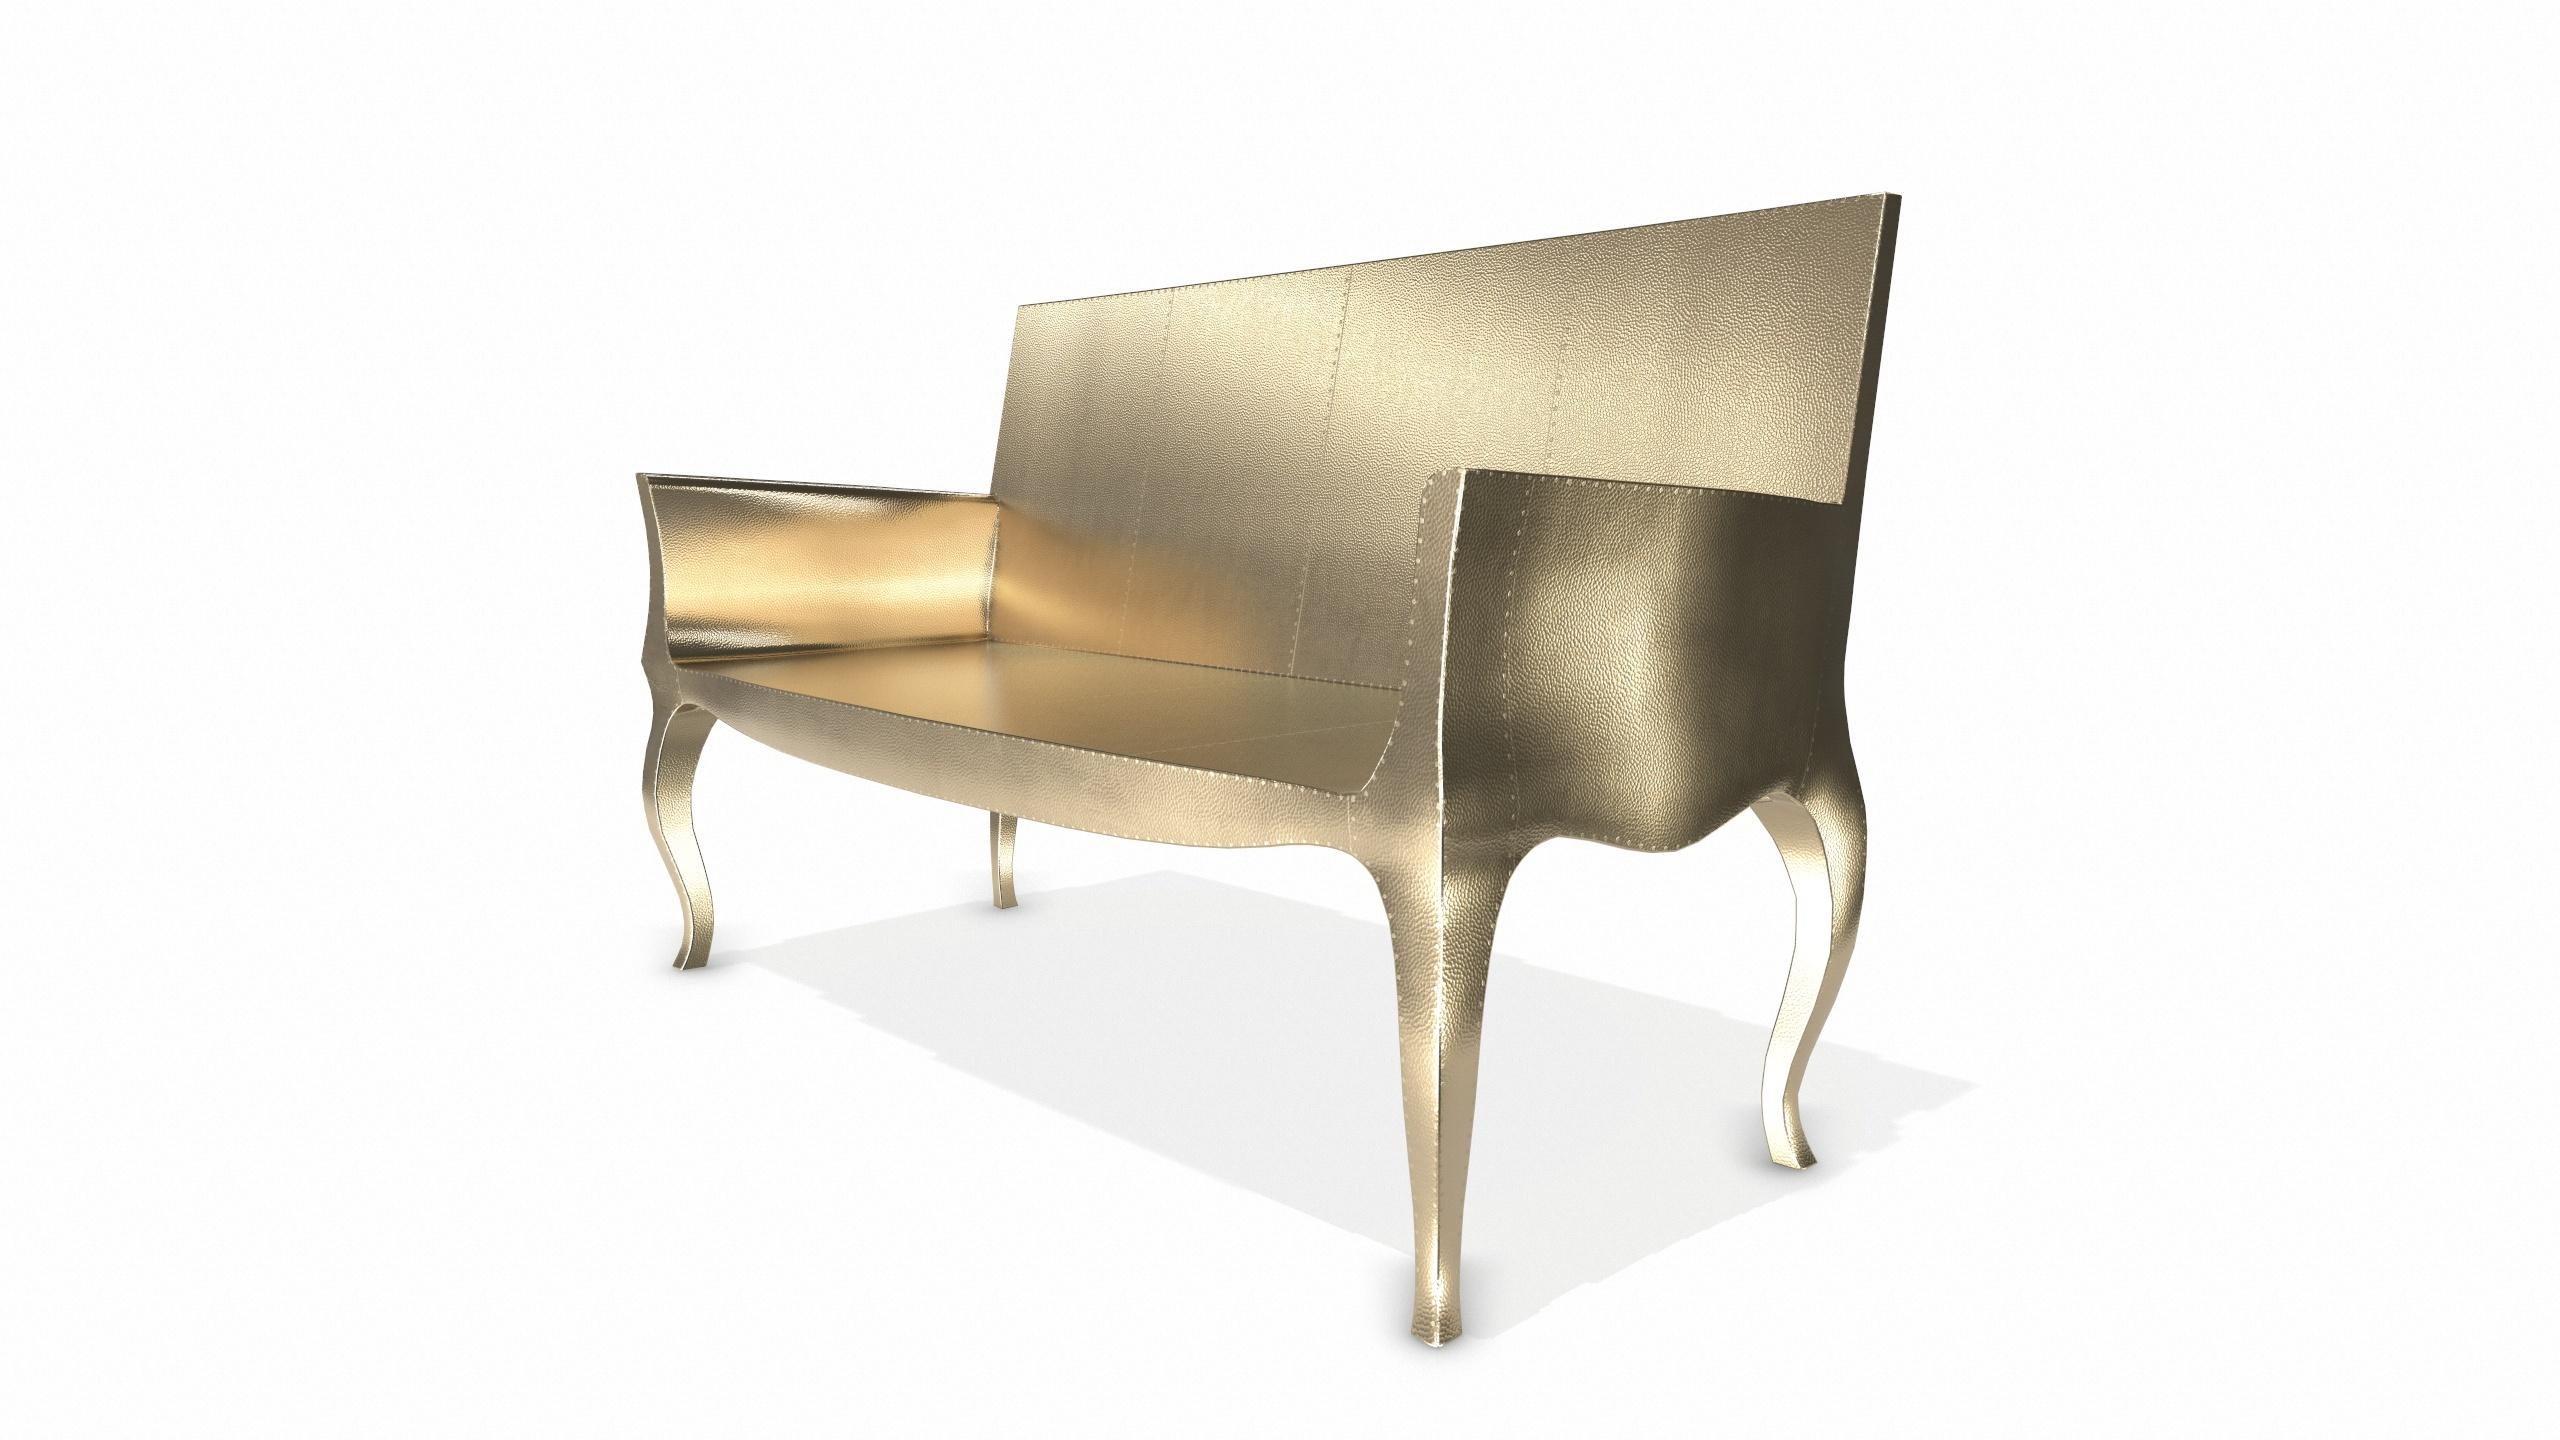 Hand-Crafted Louise Settee Art Deco Lounge Chairs in Mid. Hammered Brass by Paul Mathieu For Sale